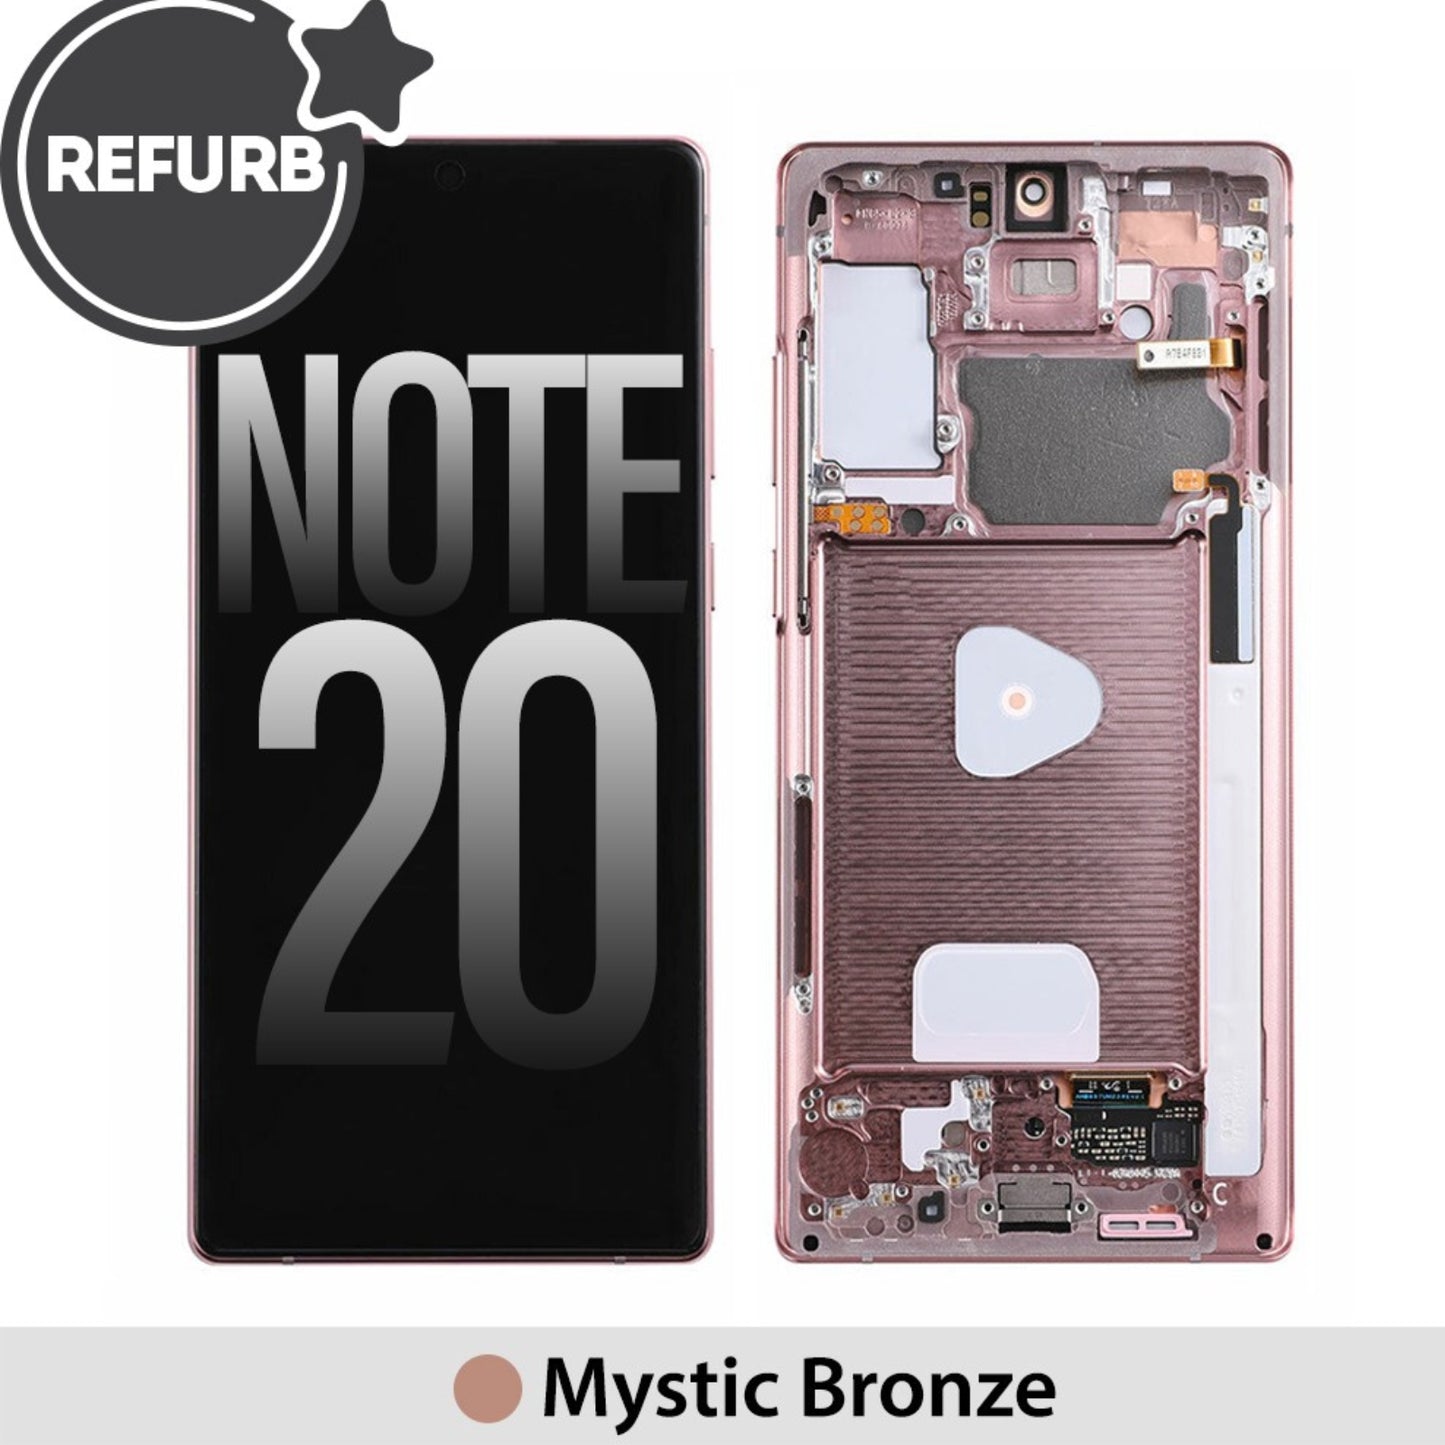 Samsung Galaxy Note 20 N980F REFURB OLED Screen Replacement